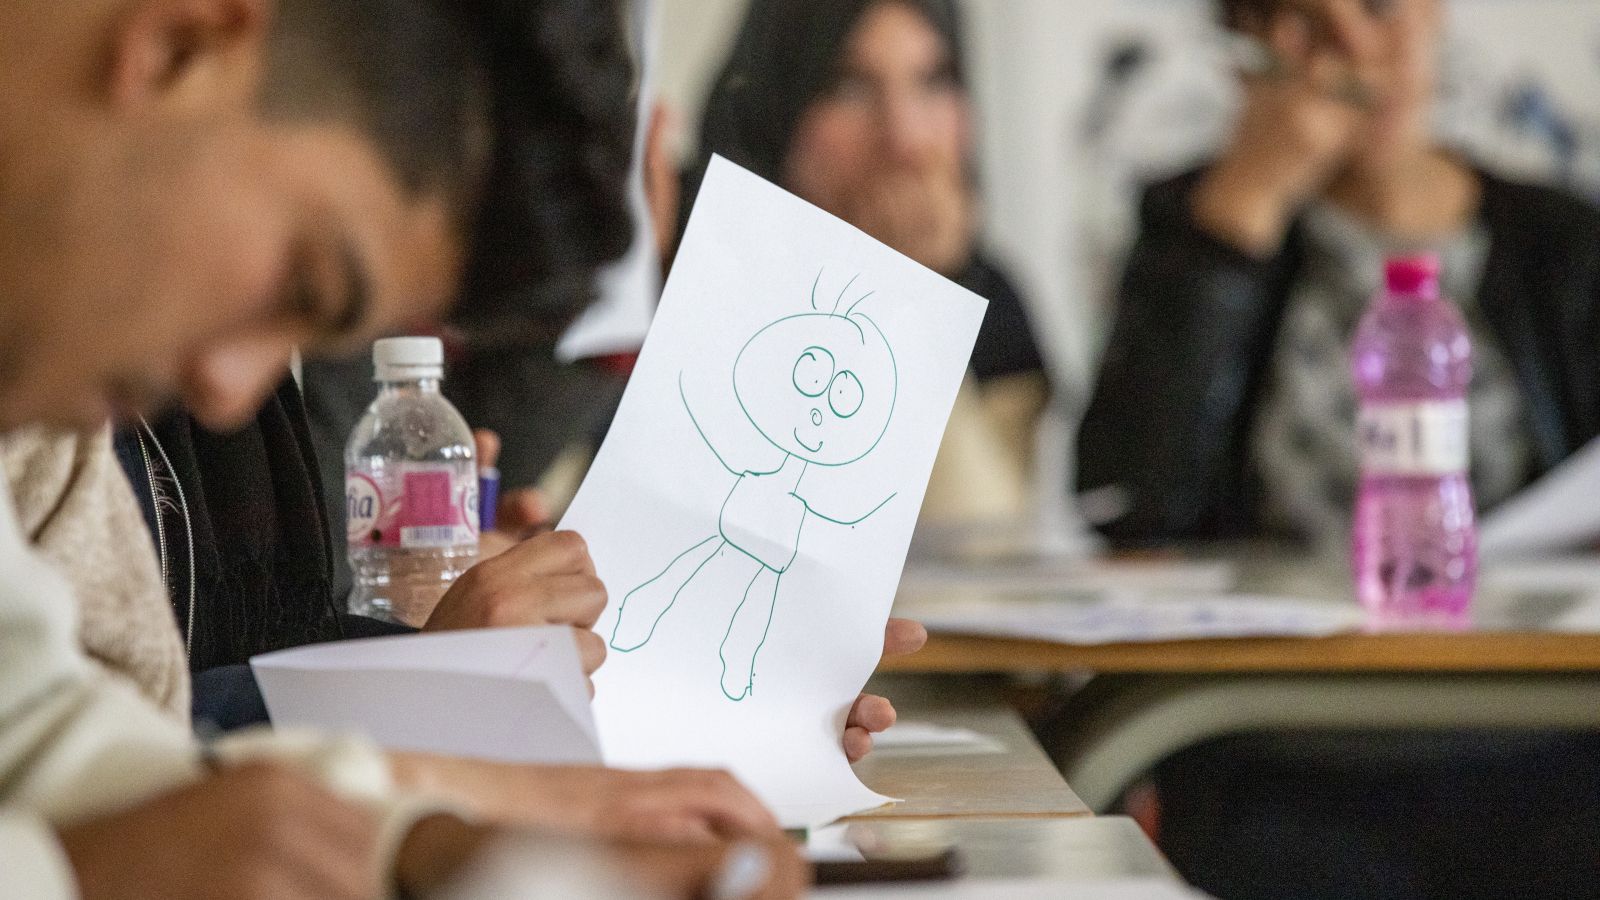 Cartooning for peace and freedom in high schools